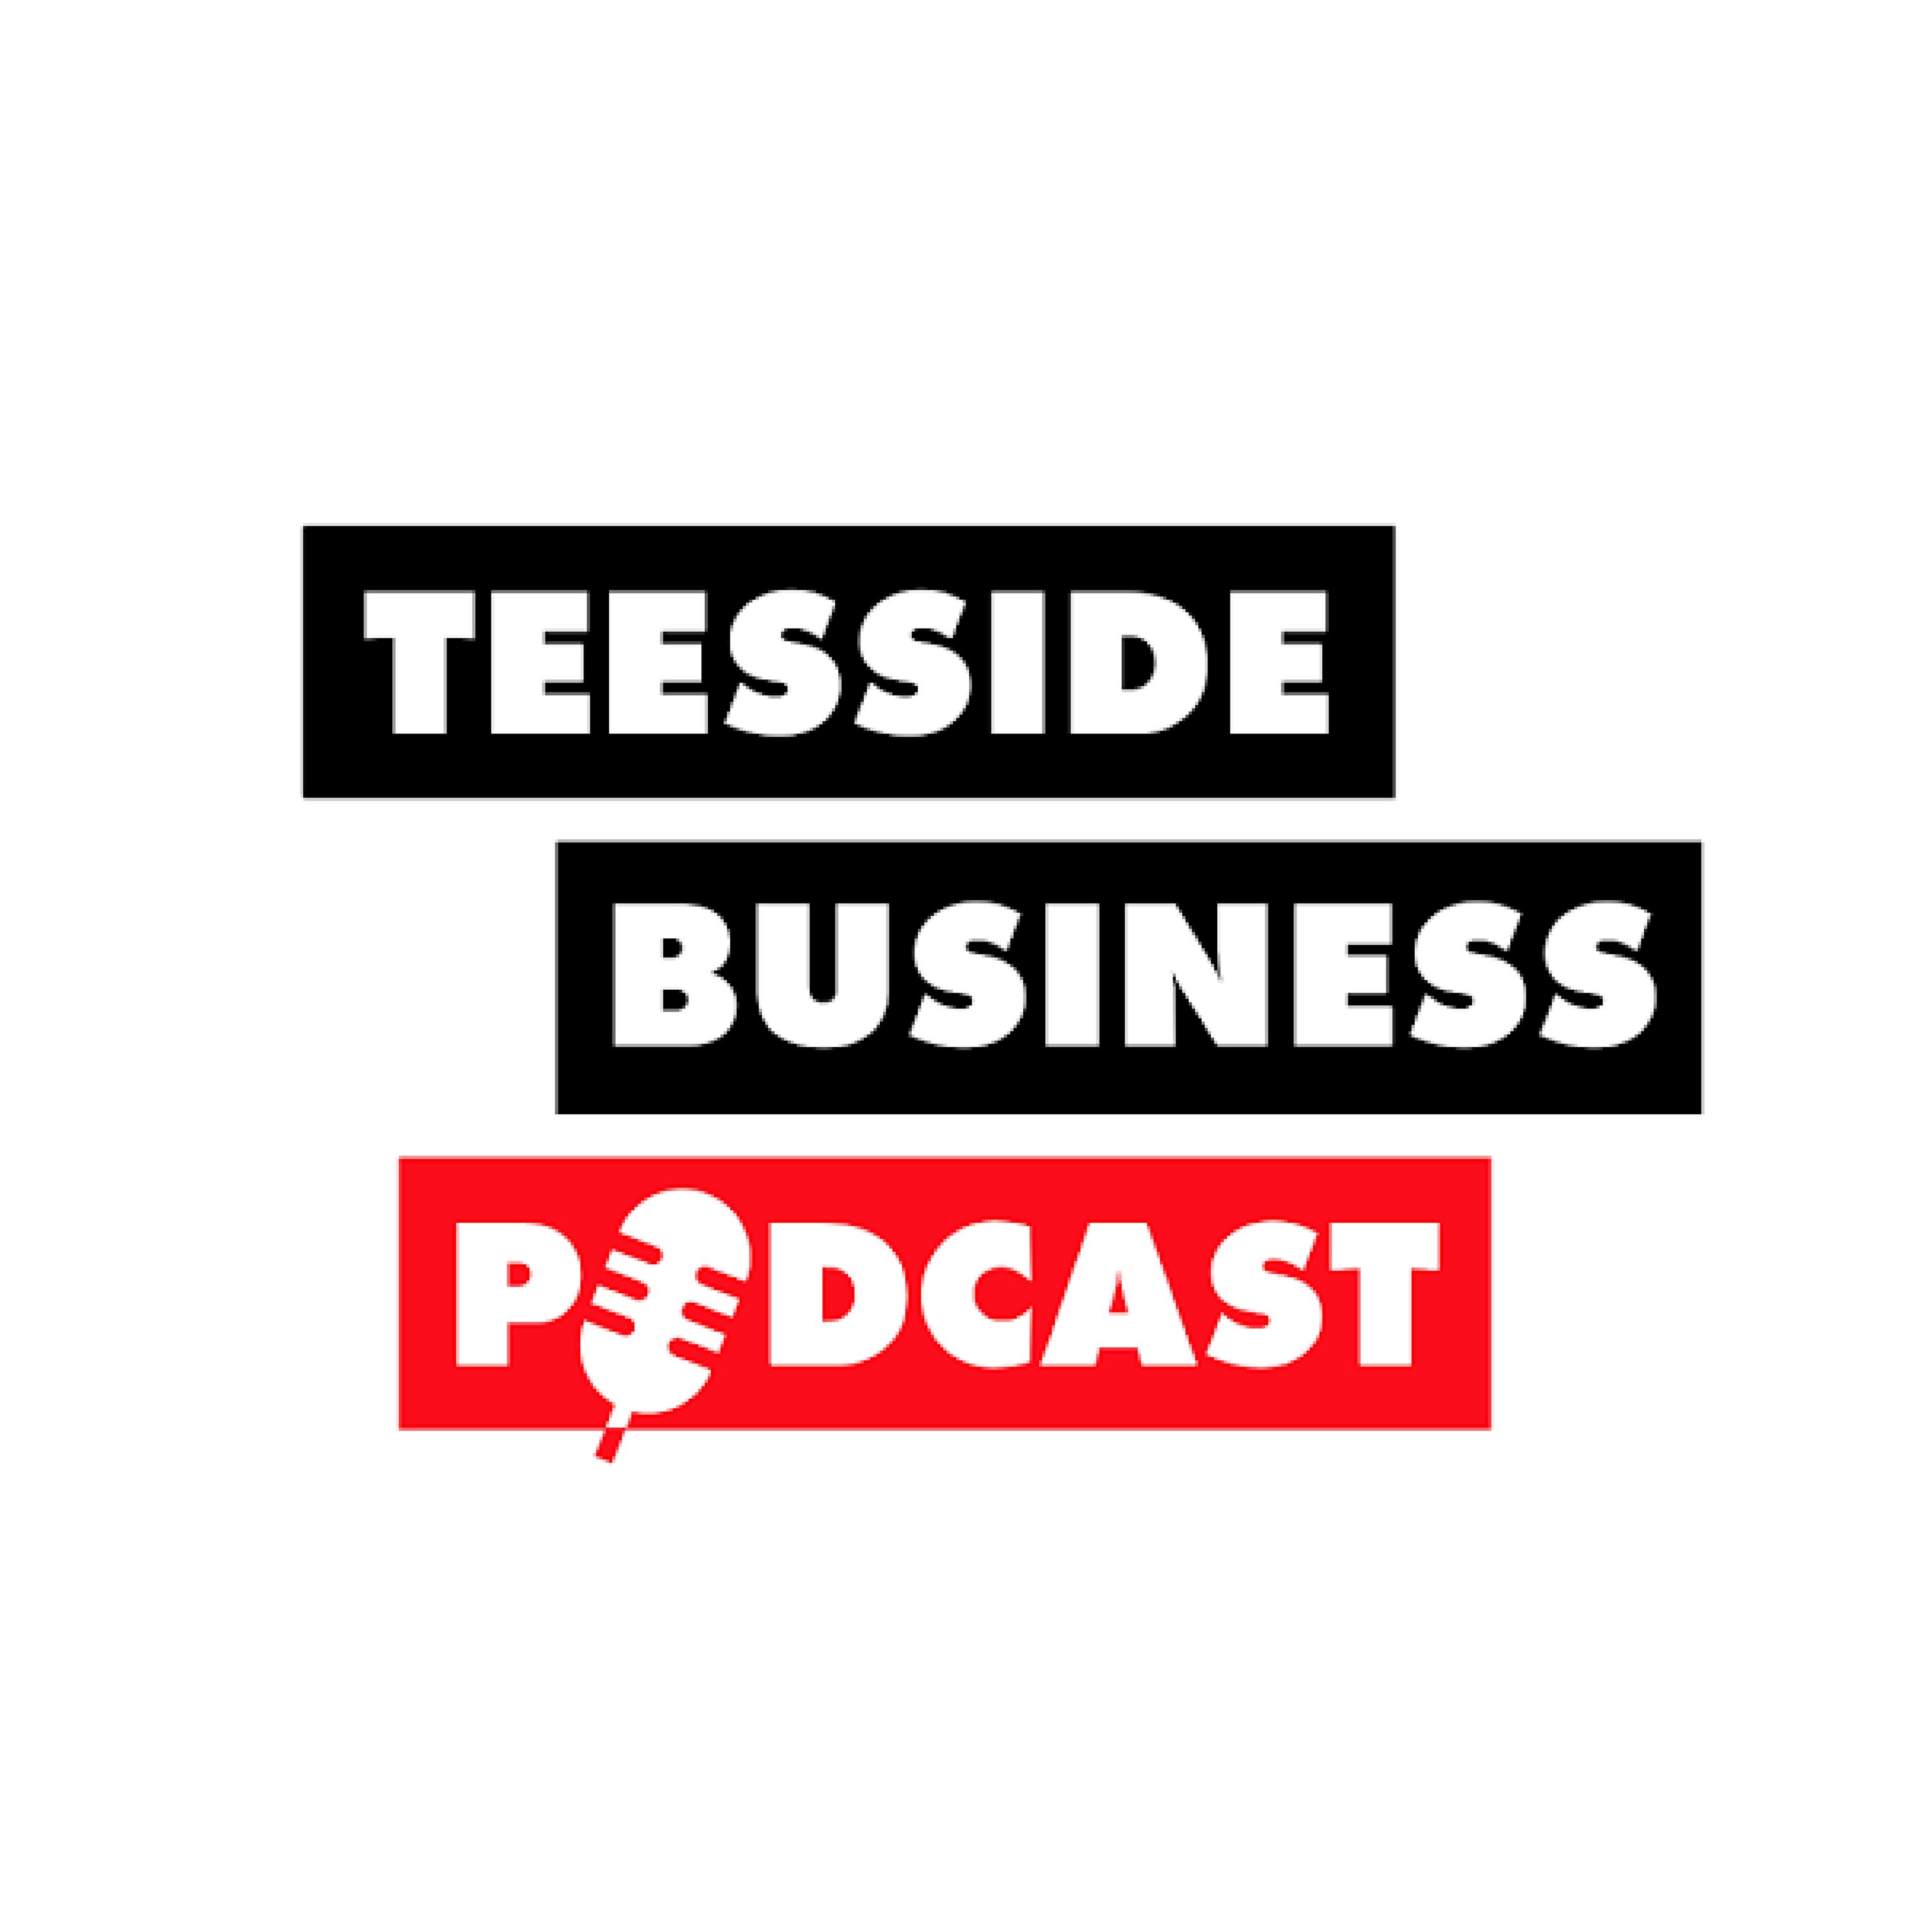 The Teesside Business Podcast